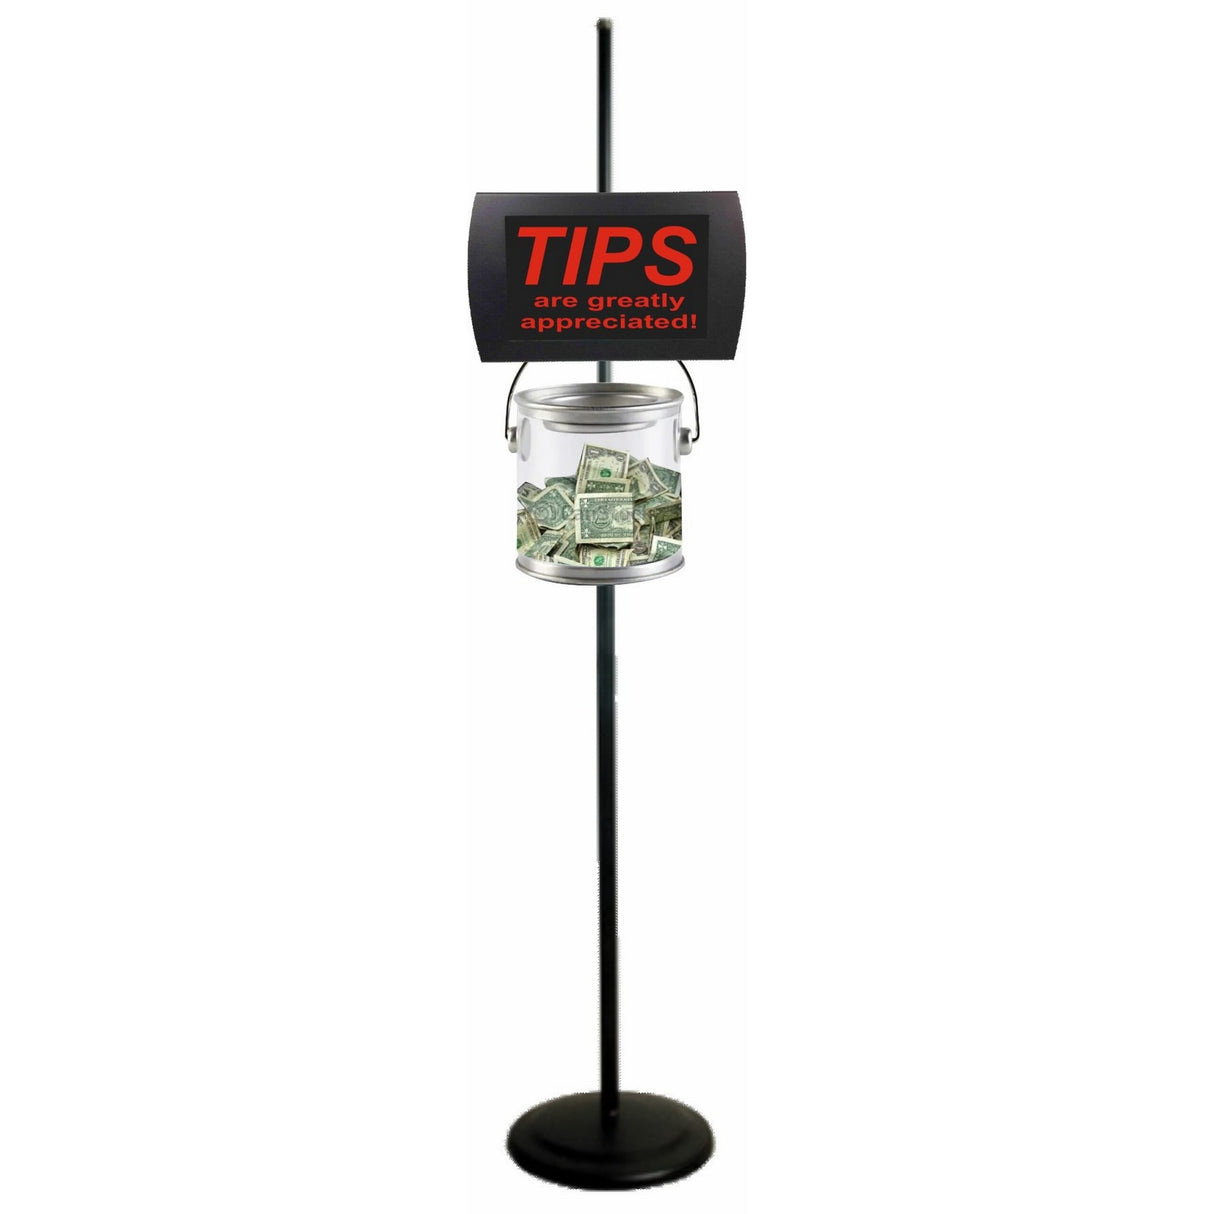 American Recorder OAS-2030M-RD/KIT "TIPS GREATLY APPRECIATED" LED Lighted Sign with Tip Pail, Red